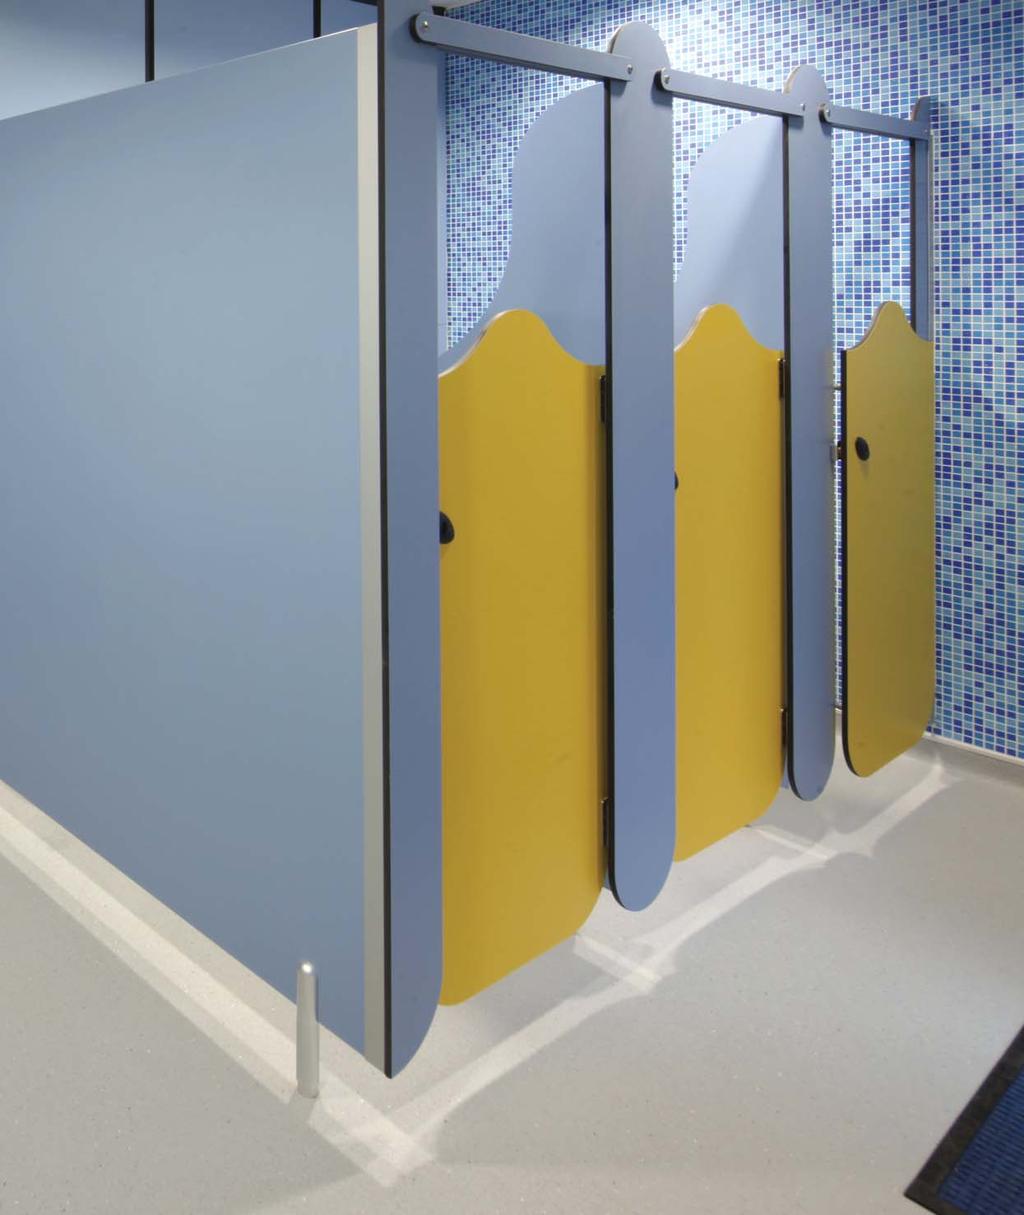 25 The unique project, which includes a rooftop five-a-side football pitch, saw Washroom Washroom provide agespecific washrooms for pupils and visitors alike.